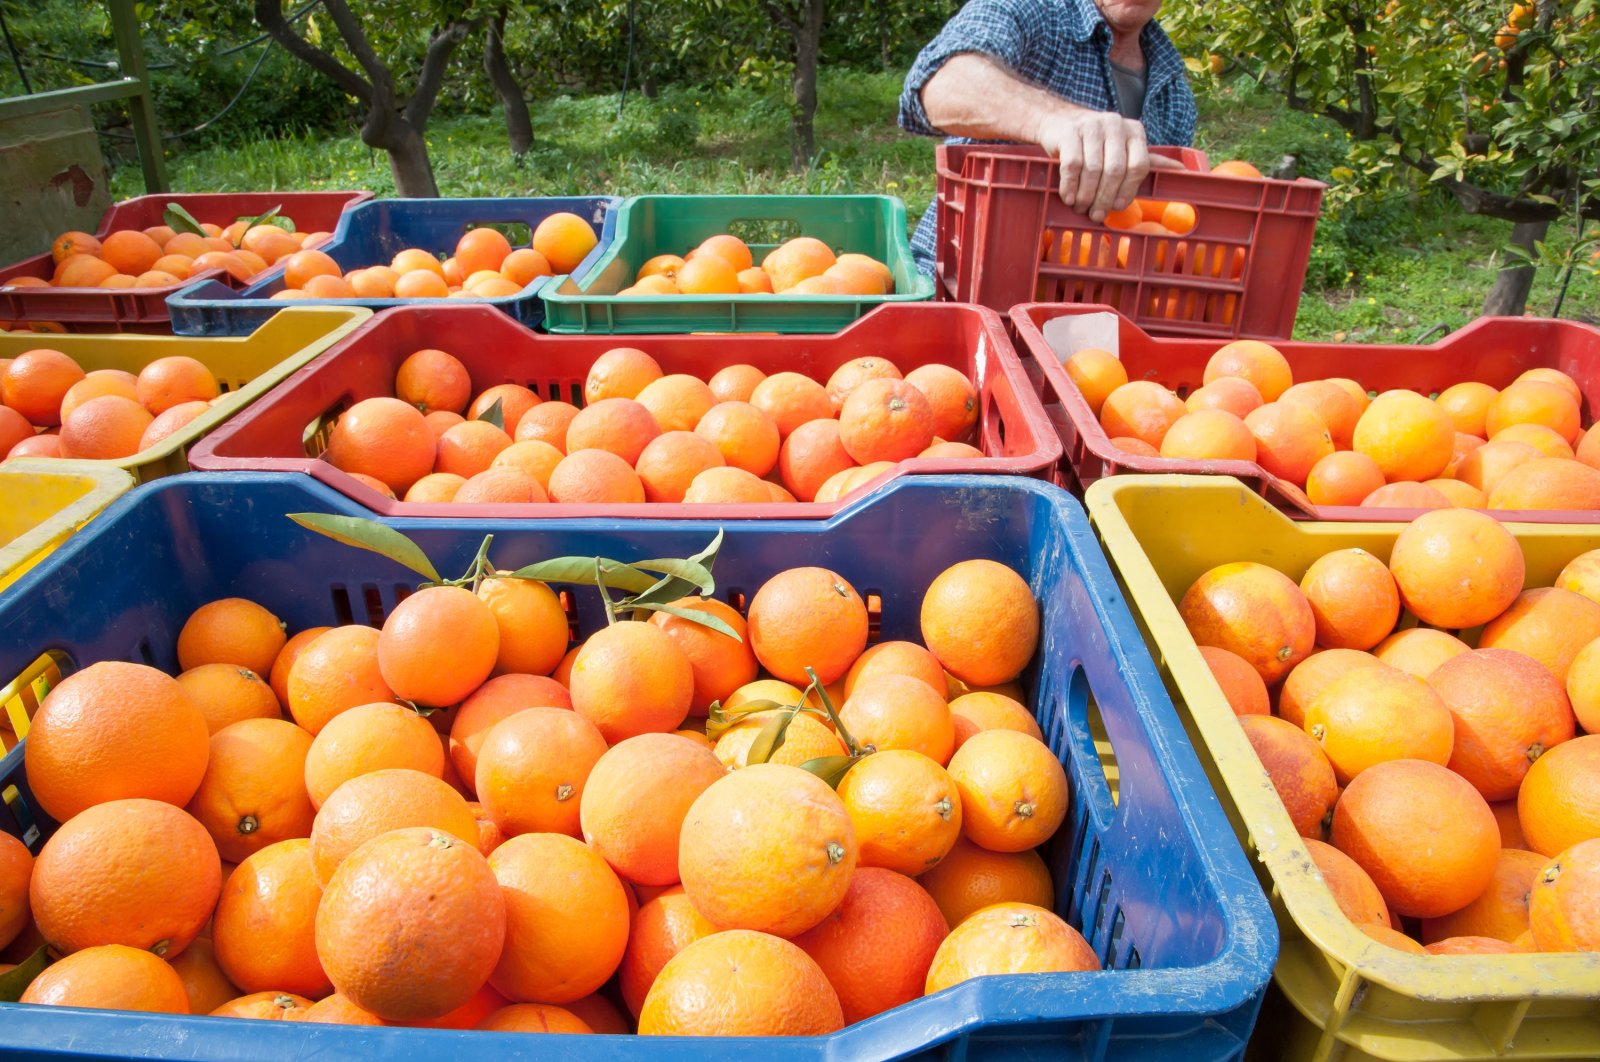 Boxes full of oranges during harvest. (Shutterstock Photo)